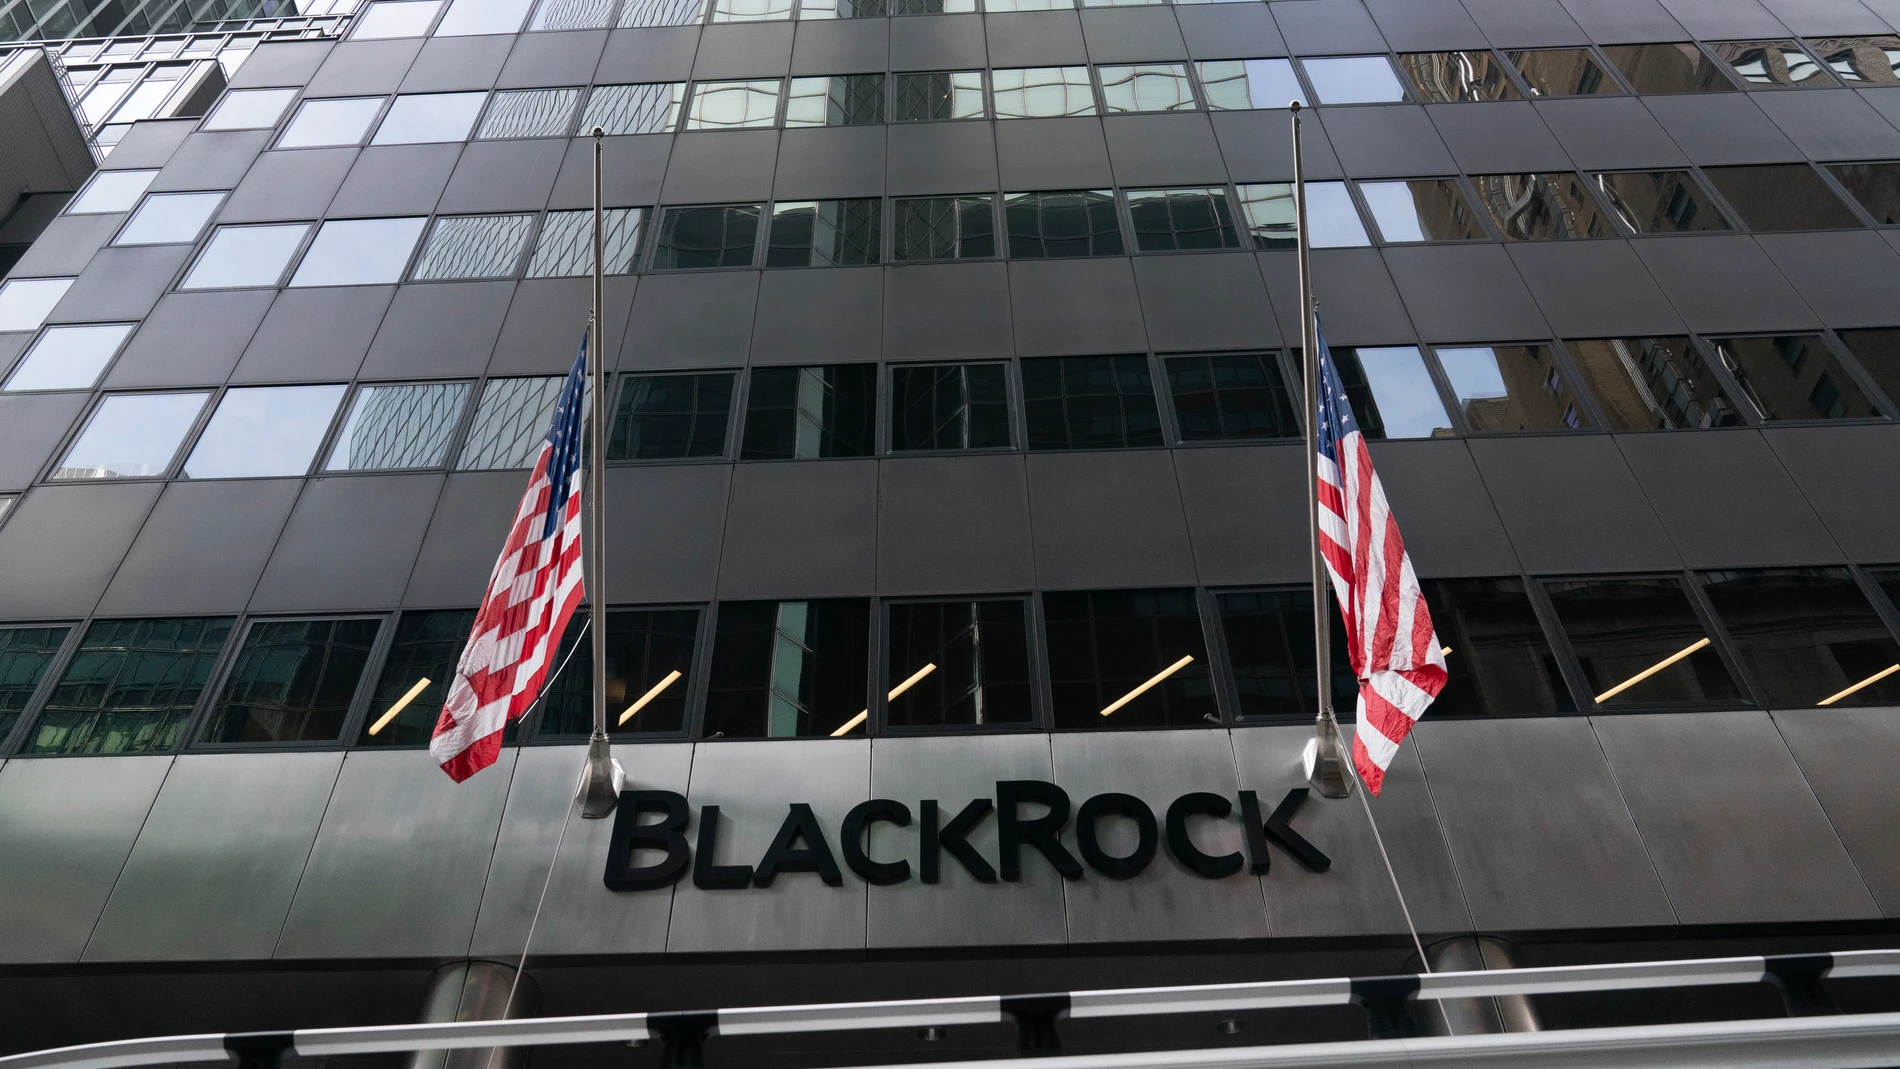 FILE -Flags fly on the front of BlackRock headquarters, Wednesday, Jan. 13, 2021, in New York. Asset manager BlackRock is buying independent infrastructure fund manager Global Infrastructure Partners in a cash-and-stock deal valued at more than $12 billion. The deal announced Friday, Jan. 12, 2024, includes $3 billion in cash and approximately 12 million shares of BlackRock. (AP Photo/Mark Lennihan, File)